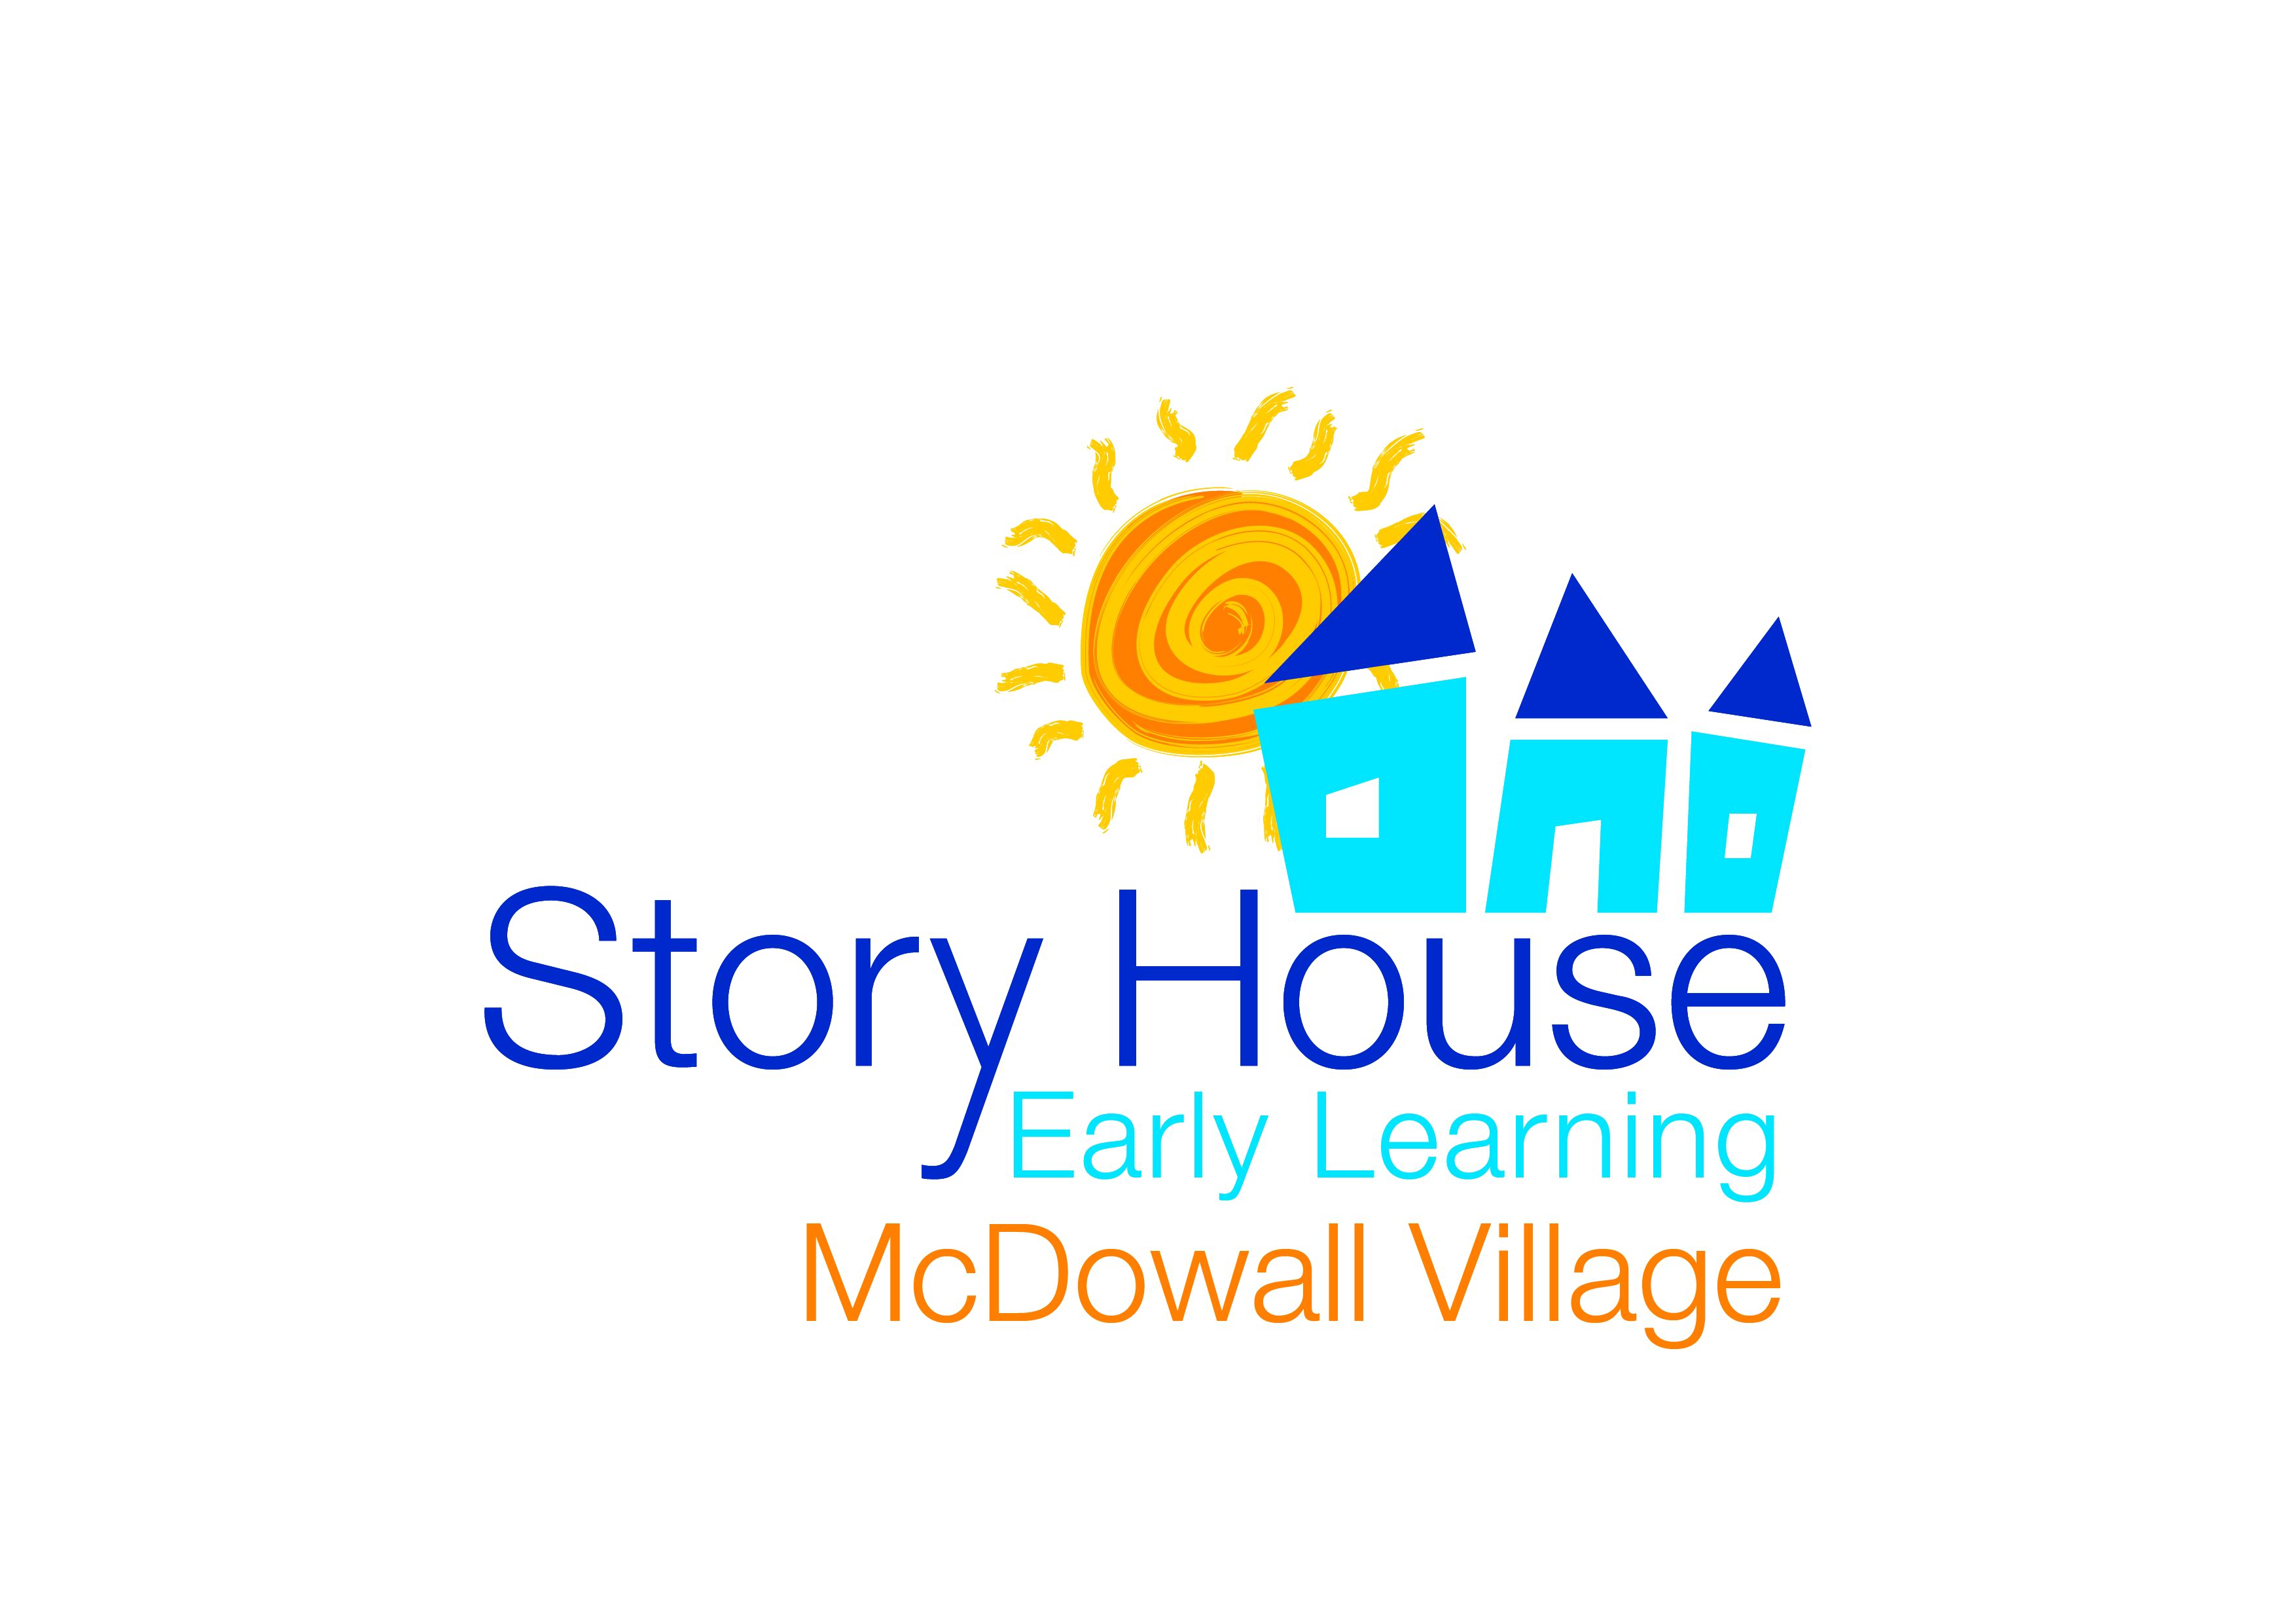 Story House Early Learning McDowall Village